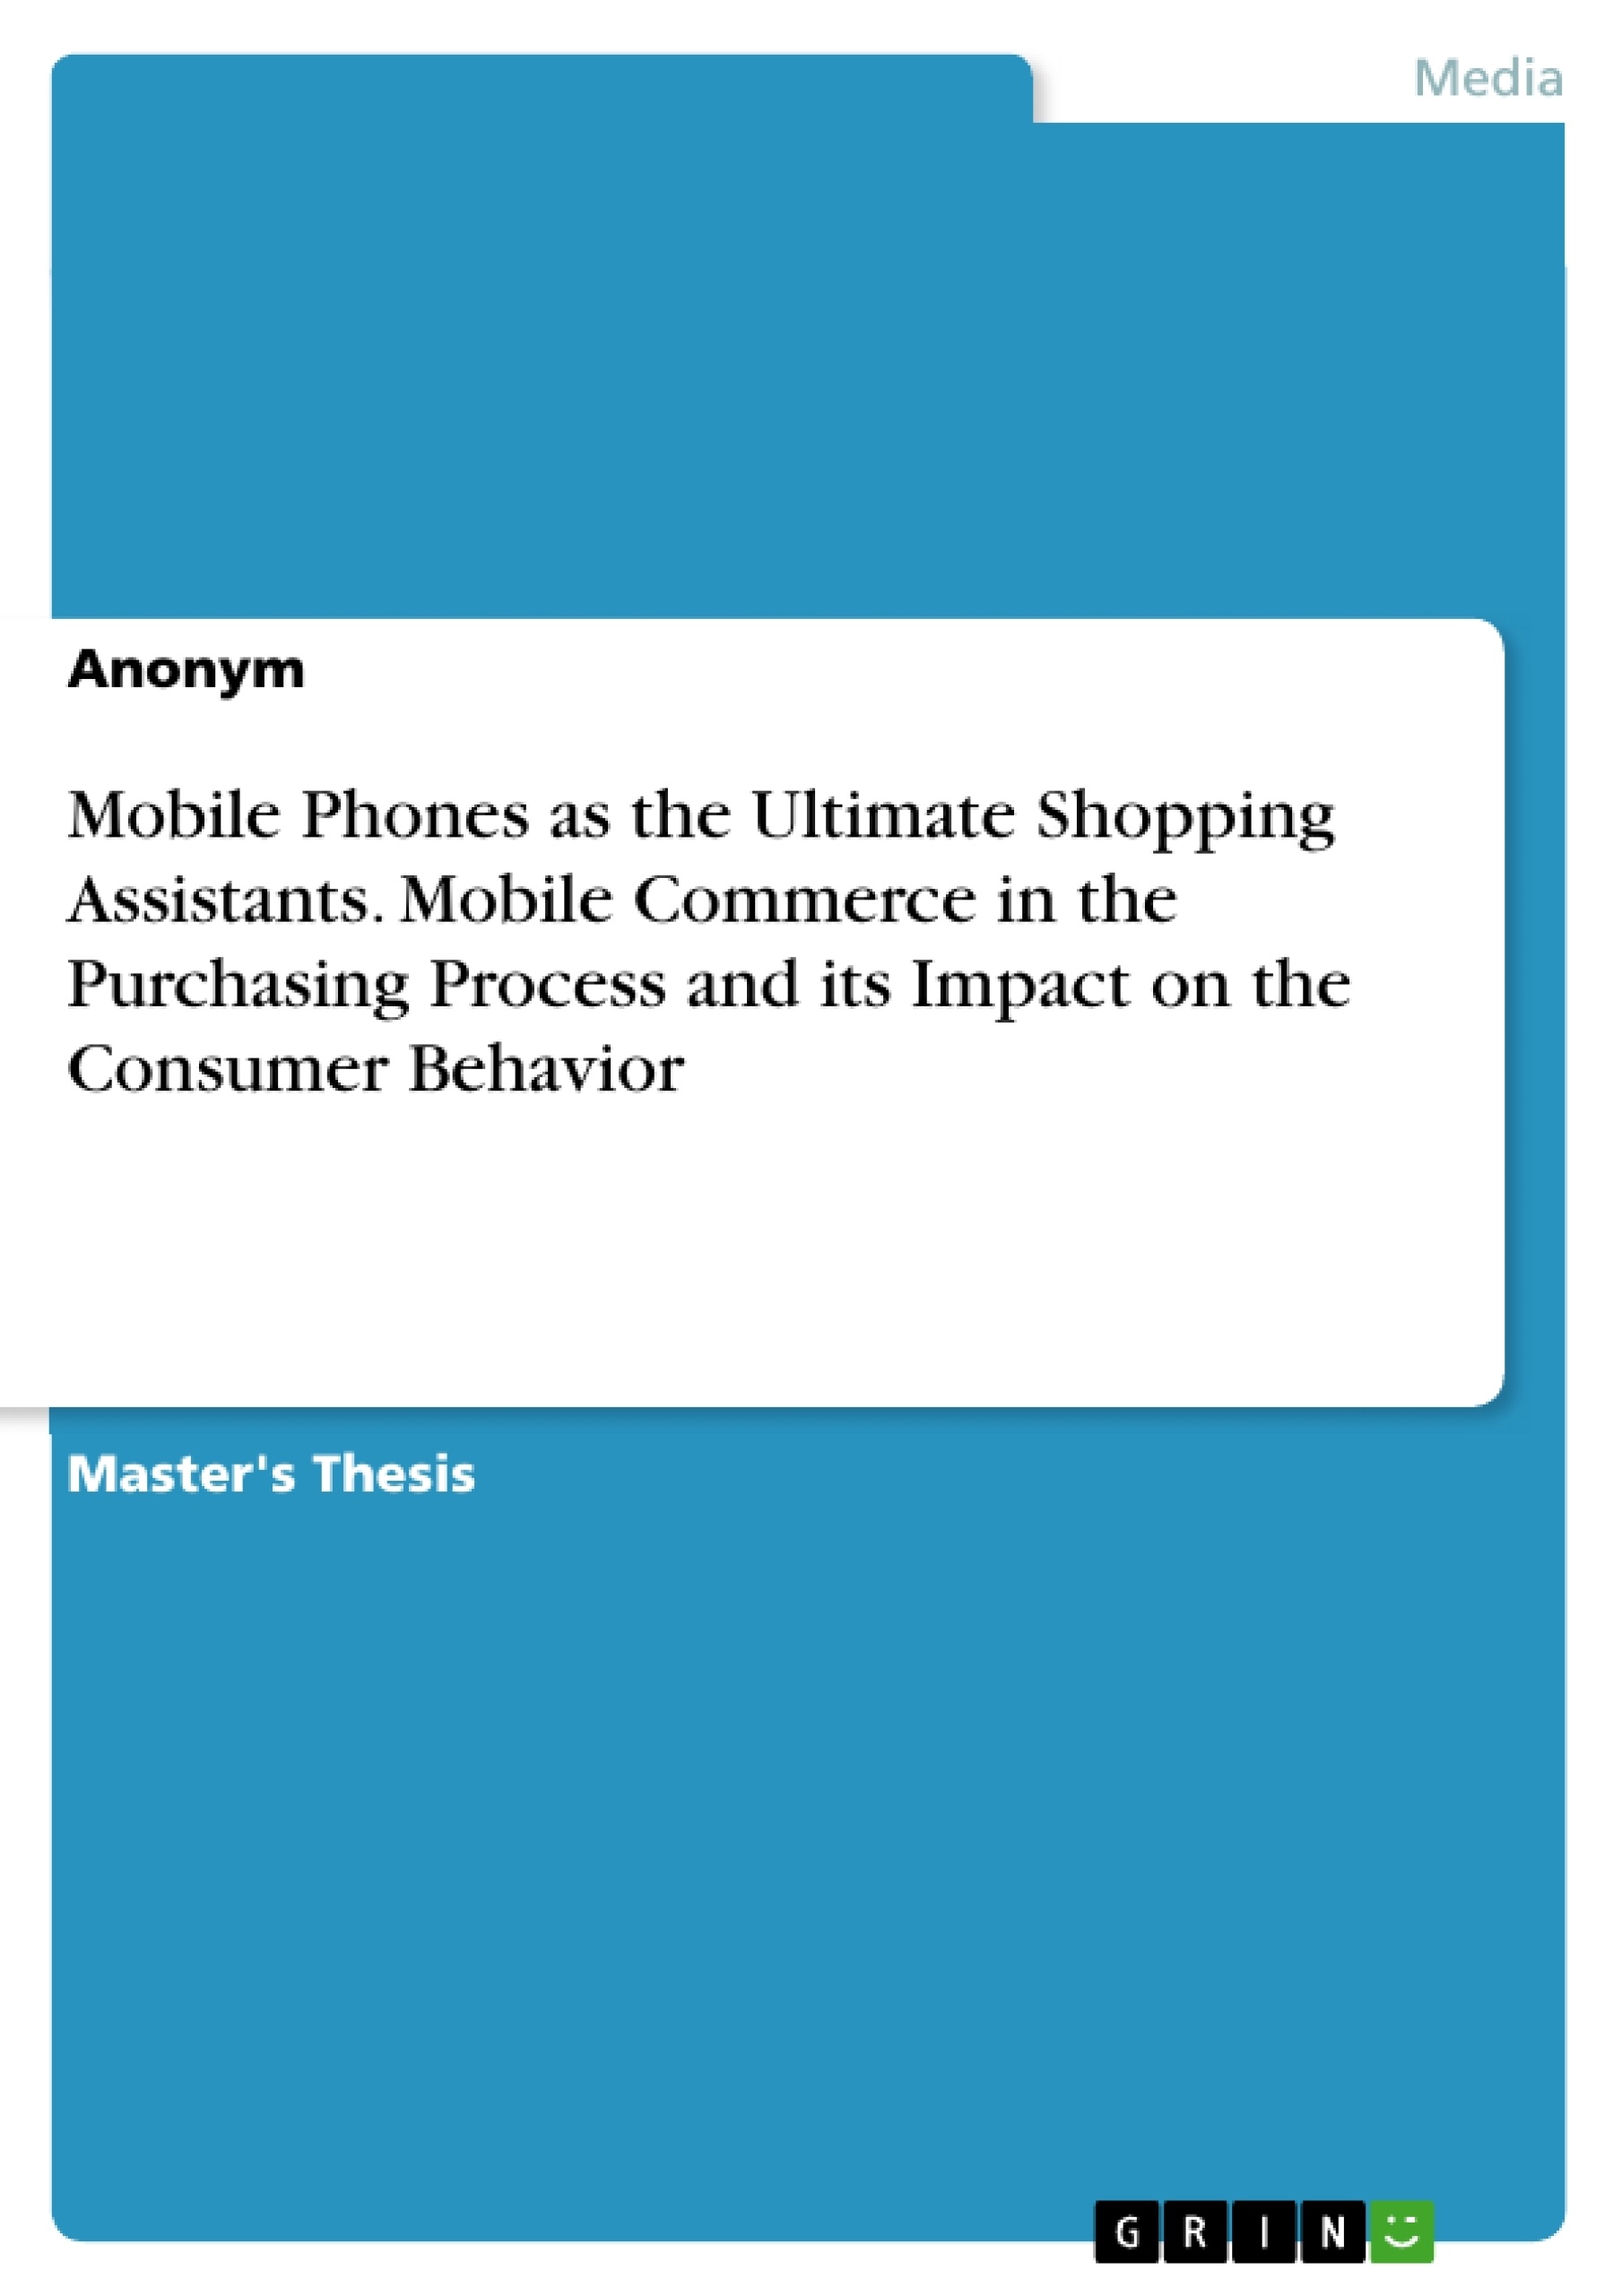 Título: Mobile Phones as the Ultimate Shopping Assistants. Mobile Commerce in the Purchasing Process and its Impact on the Consumer Behavior